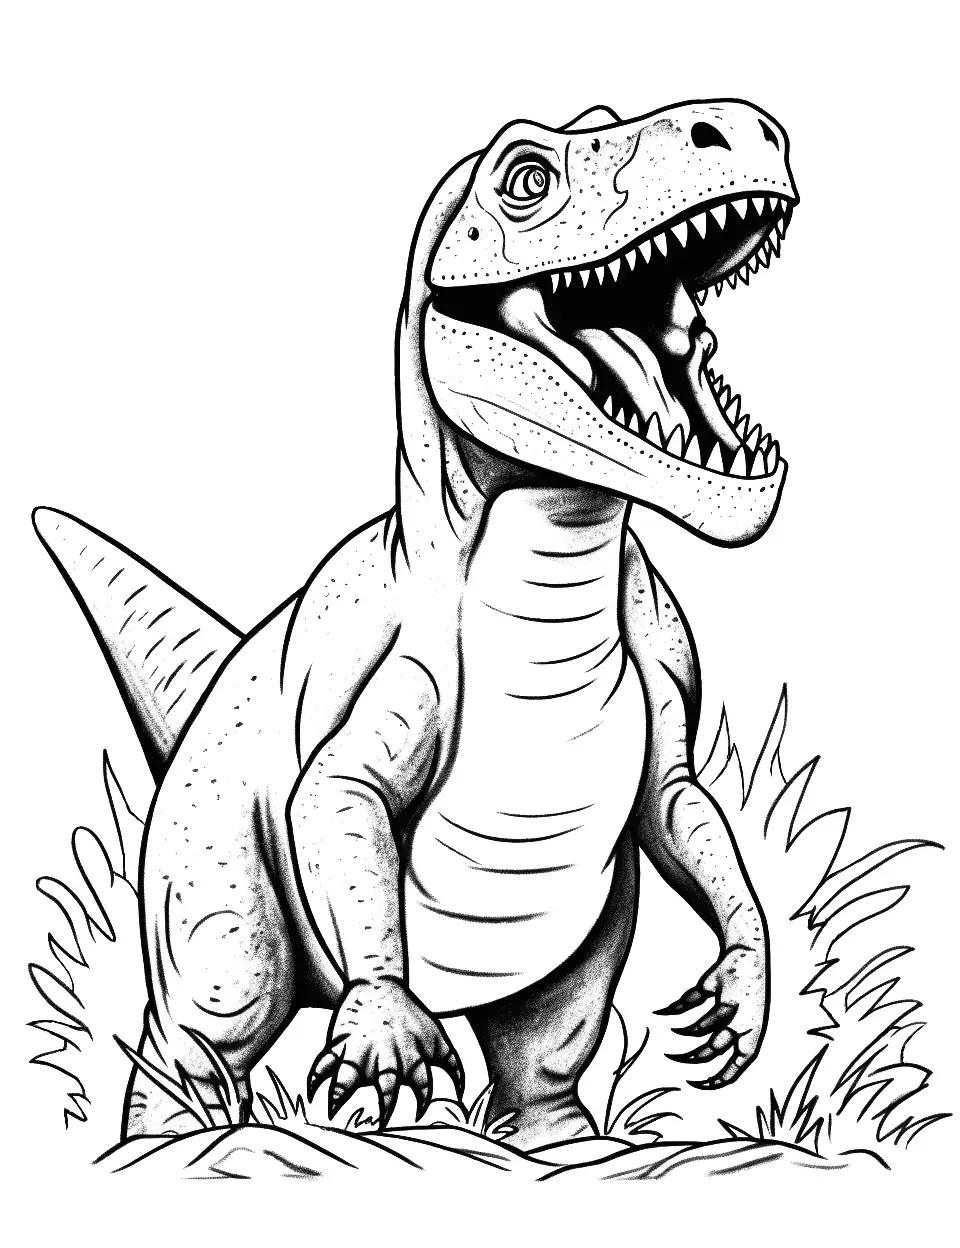 Tyrannosaurus Roar Dinosaur Coloring Page - A fearsome Tyrannosaurus letting out a mighty roar.